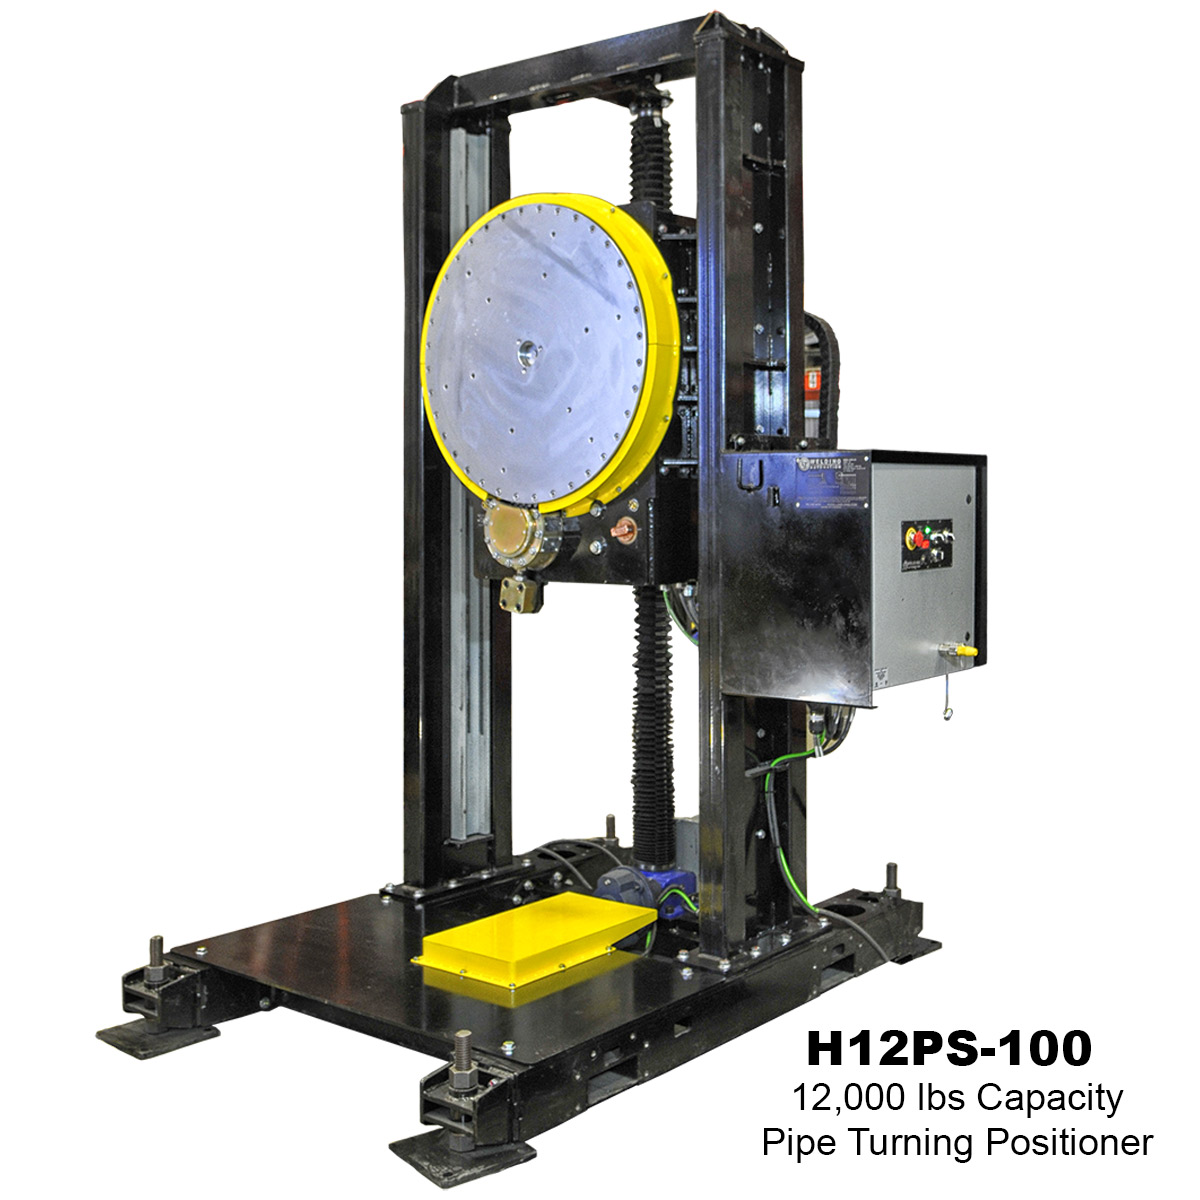 01-12000lb-Pipe-Turning-Positioner